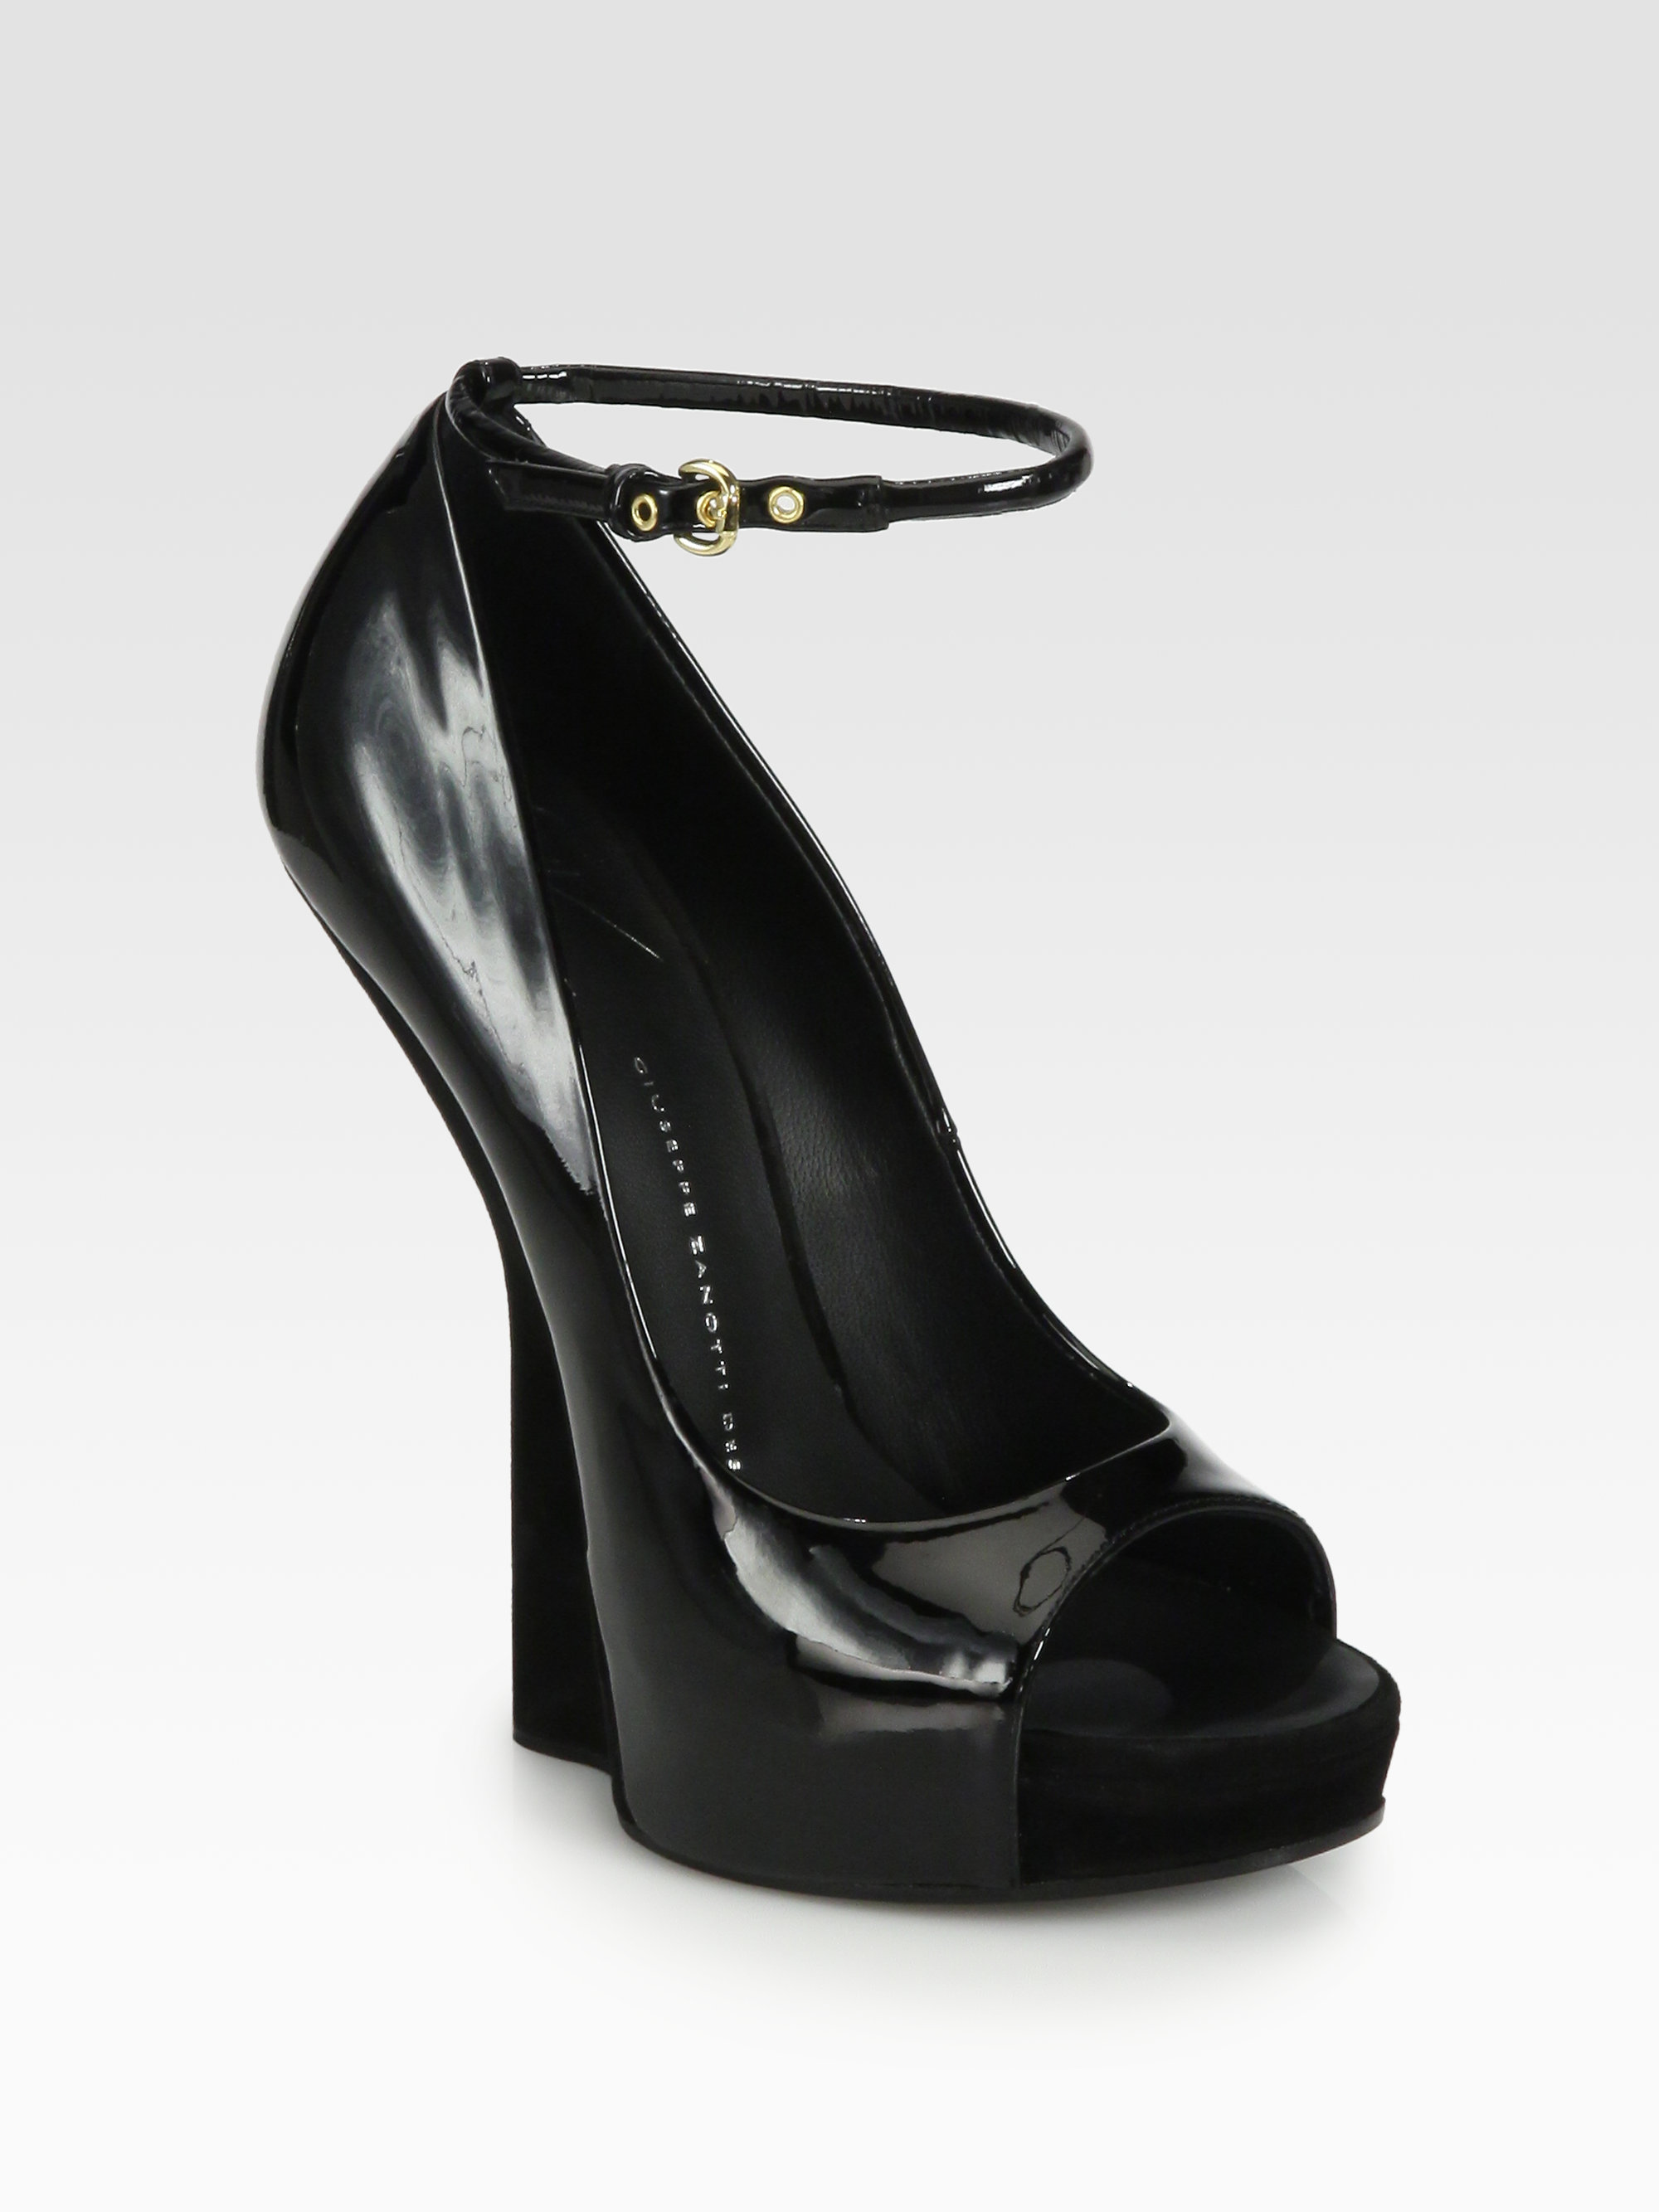 Giuseppe Zanotti Alien Patent Leather Suede Curved Wedge Pumps in Black ...